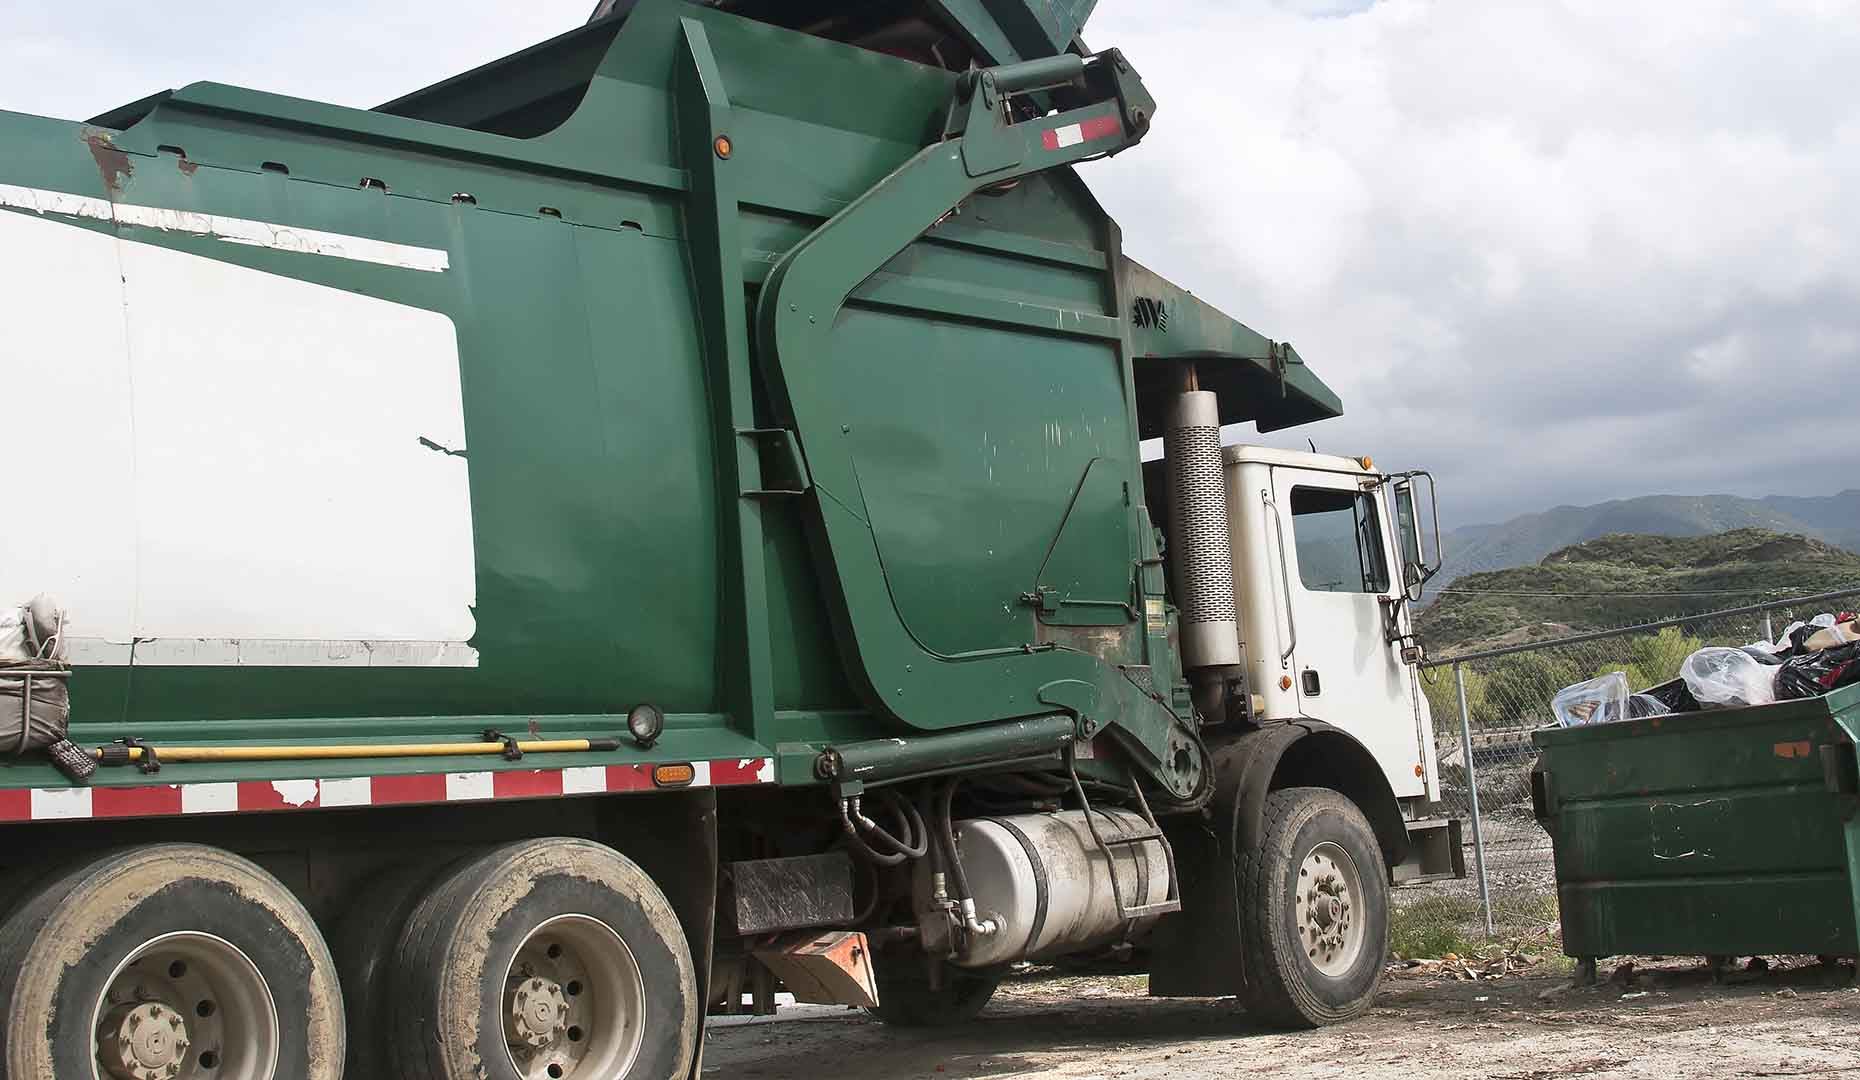 Garbage Truck Accidents